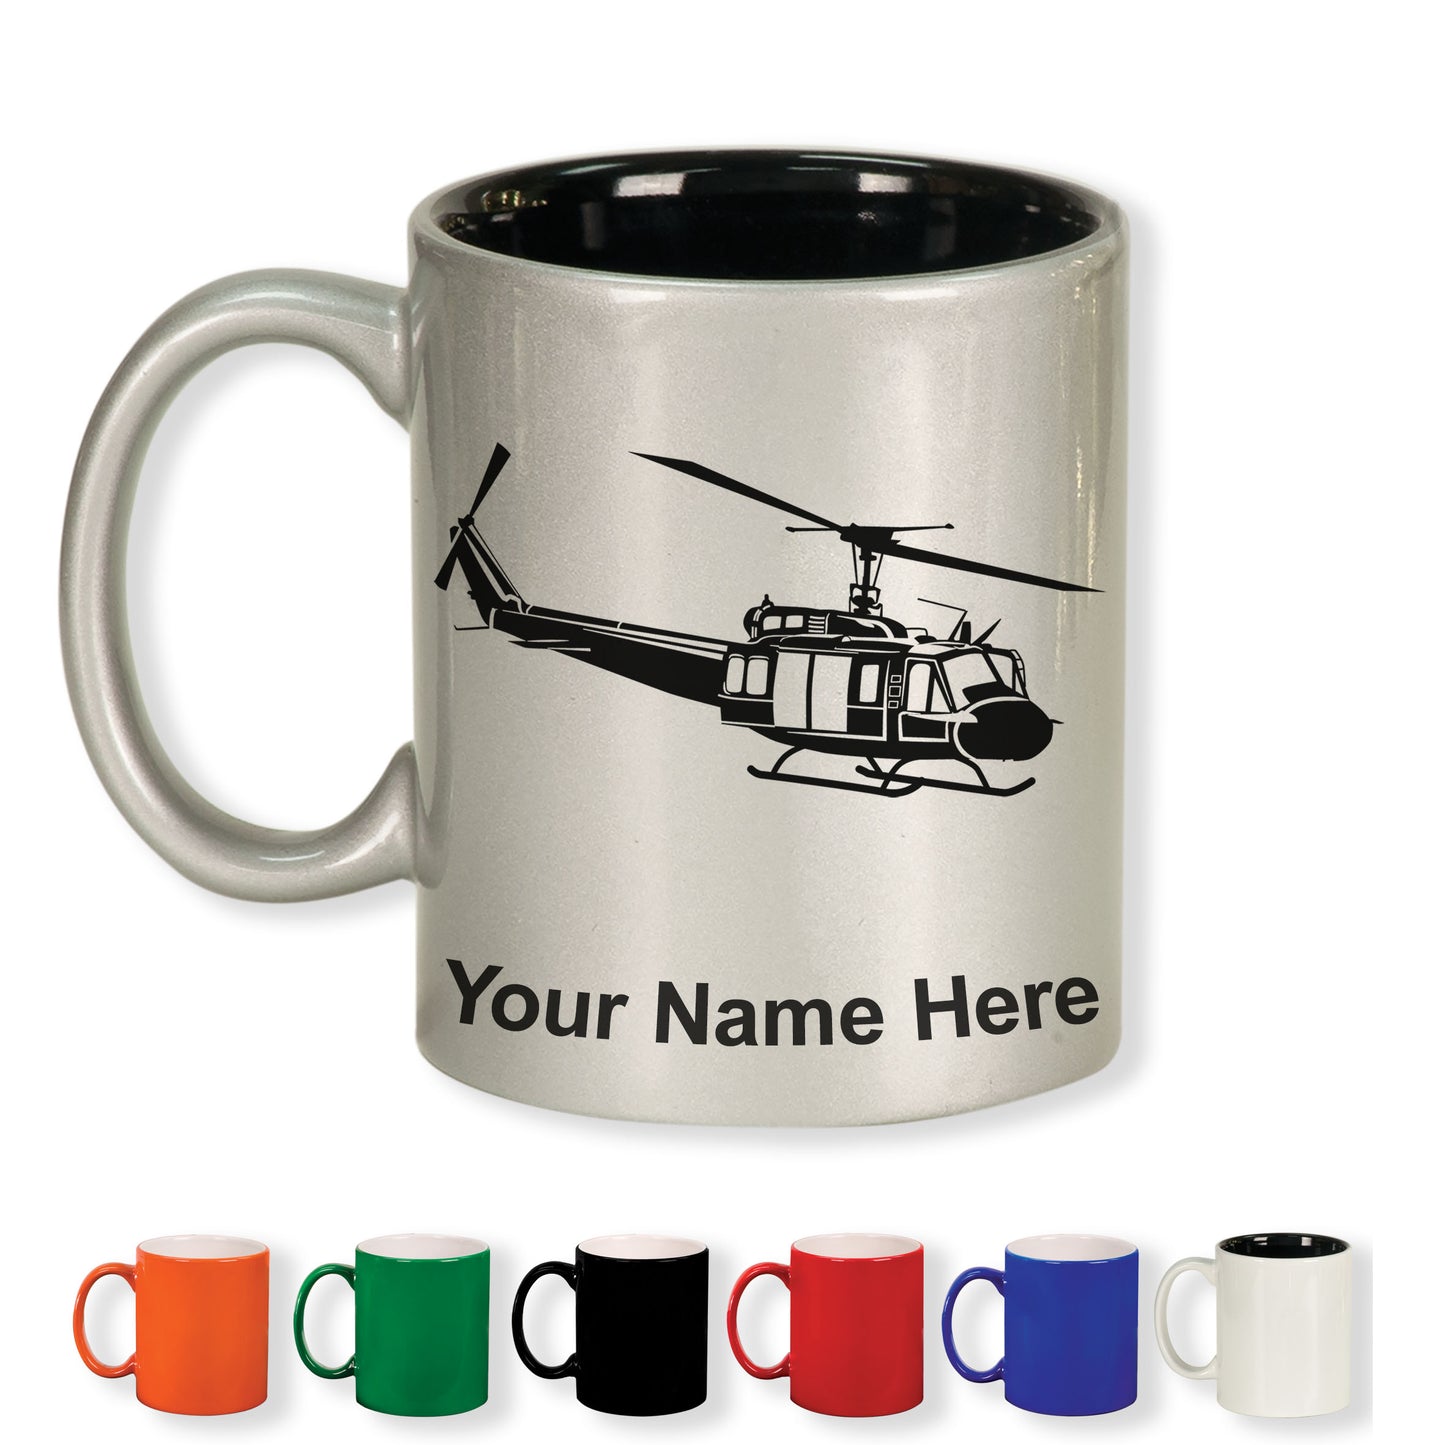 11oz Round Ceramic Coffee Mug, Military Helicopter 2, Personalized Engraving Included